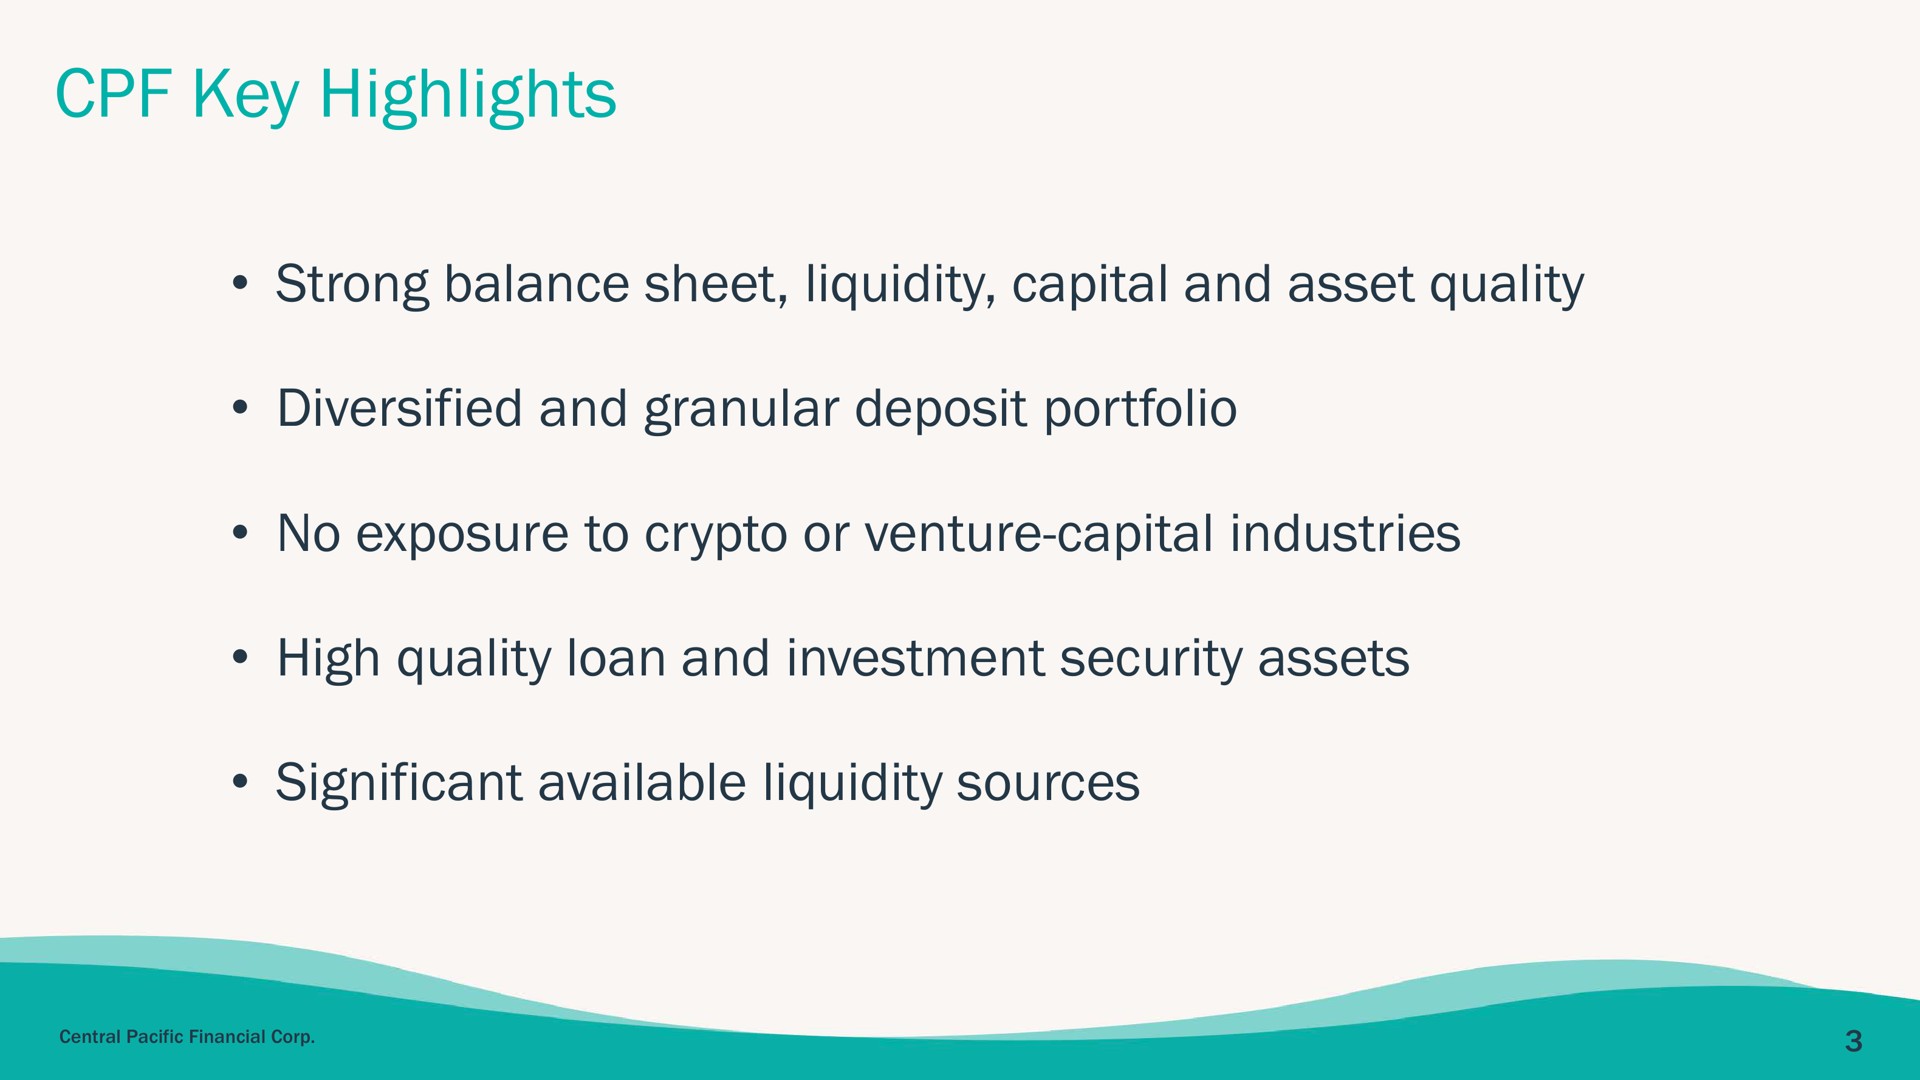 key highlights strong balance sheet liquidity capital and asset quality diversified and granular deposit portfolio no exposure to or venture capital industries high quality loan and investment security assets significant available liquidity sources | Central Pacific Financial